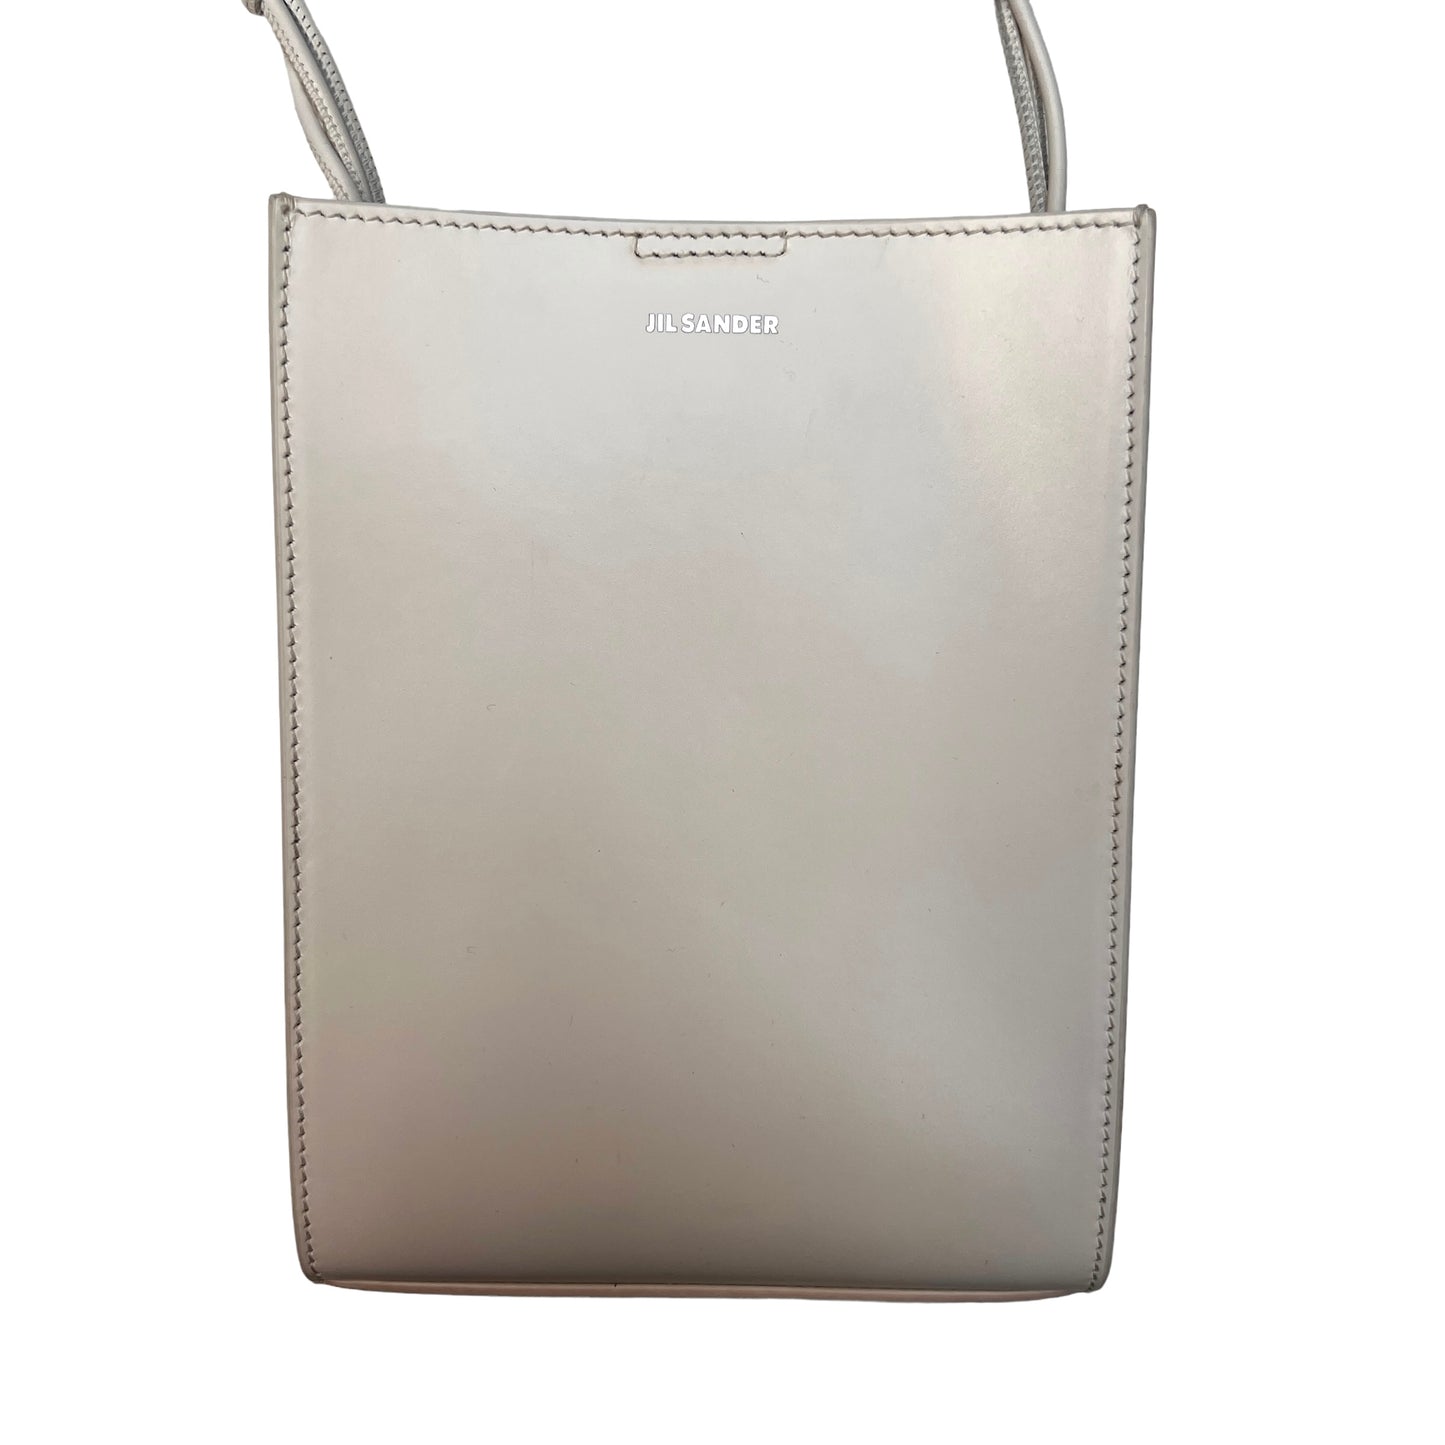 Small White Leather Bag